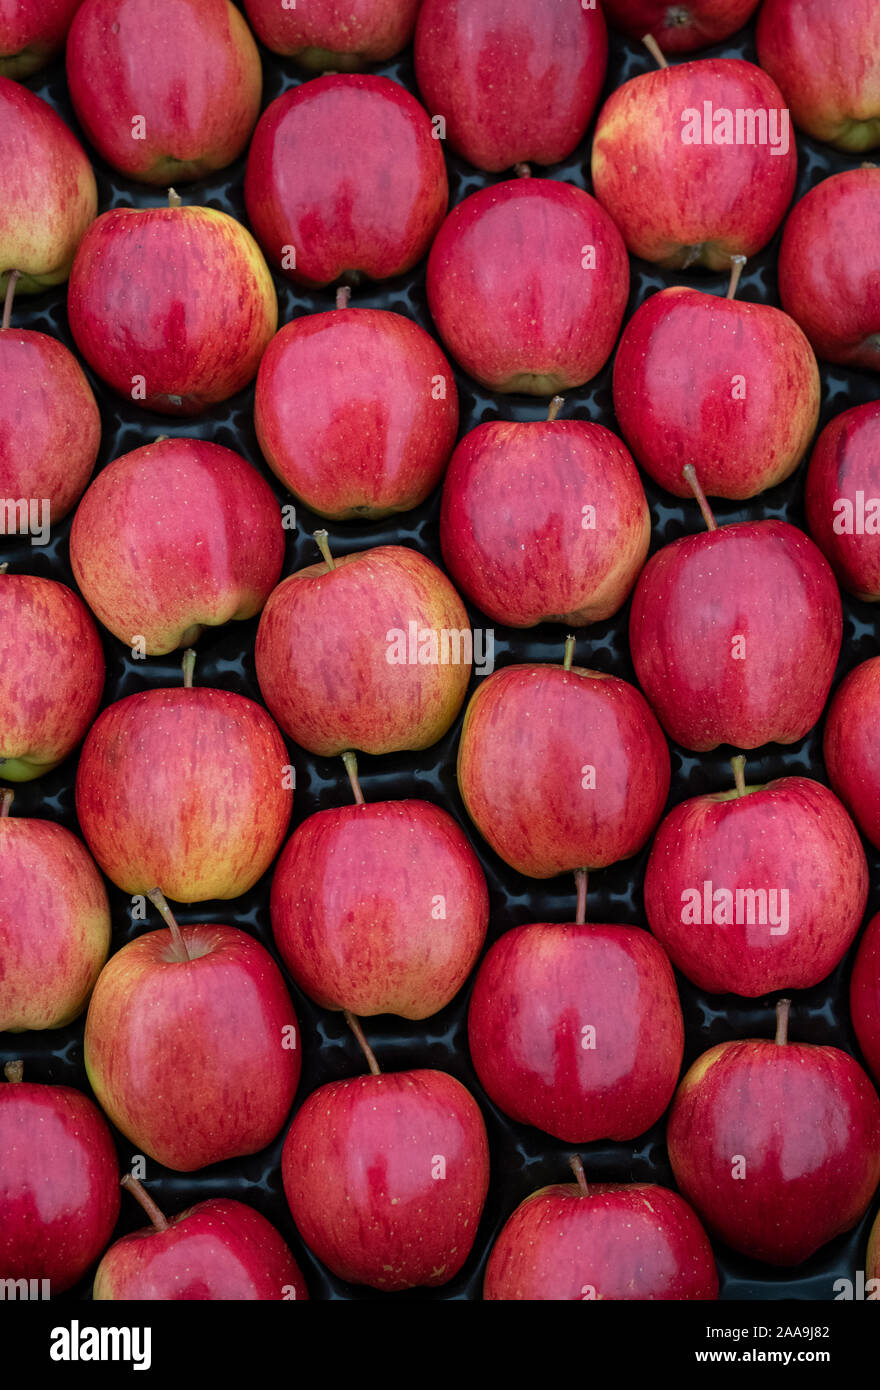 Red apples in autumn on display Stock Photo